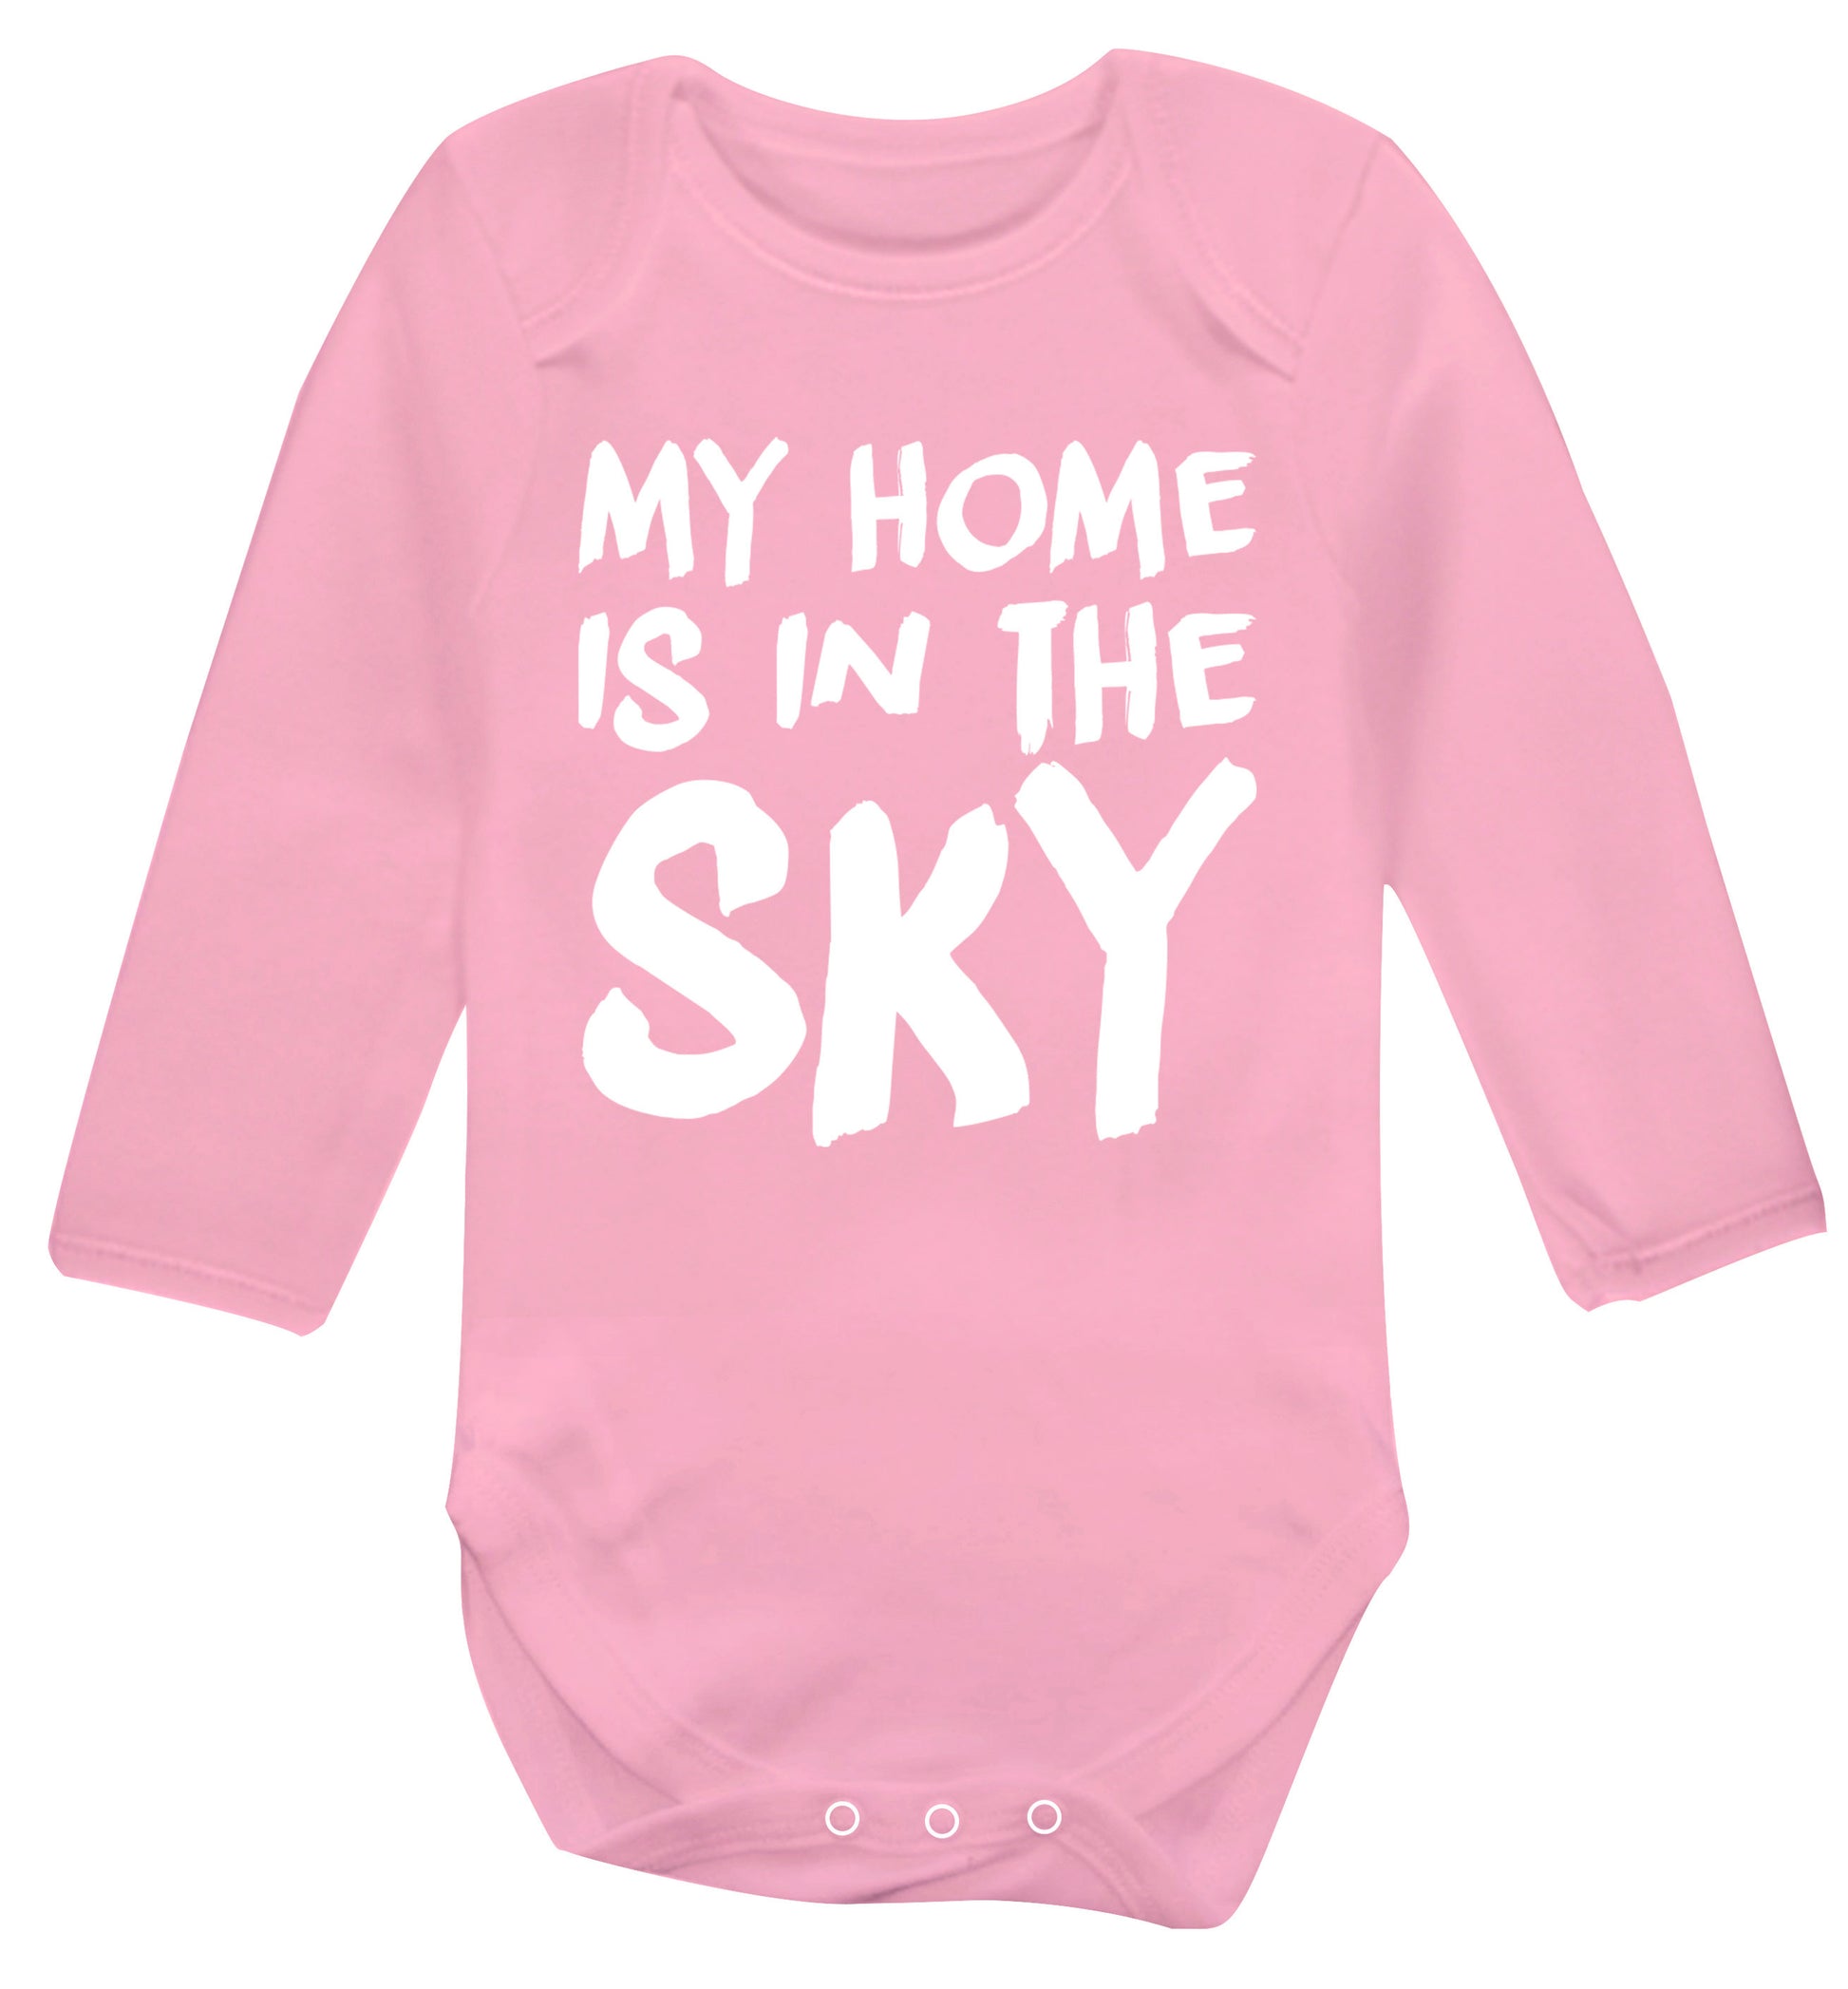 My home is in the sky Baby Vest long sleeved pale pink 6-12 months